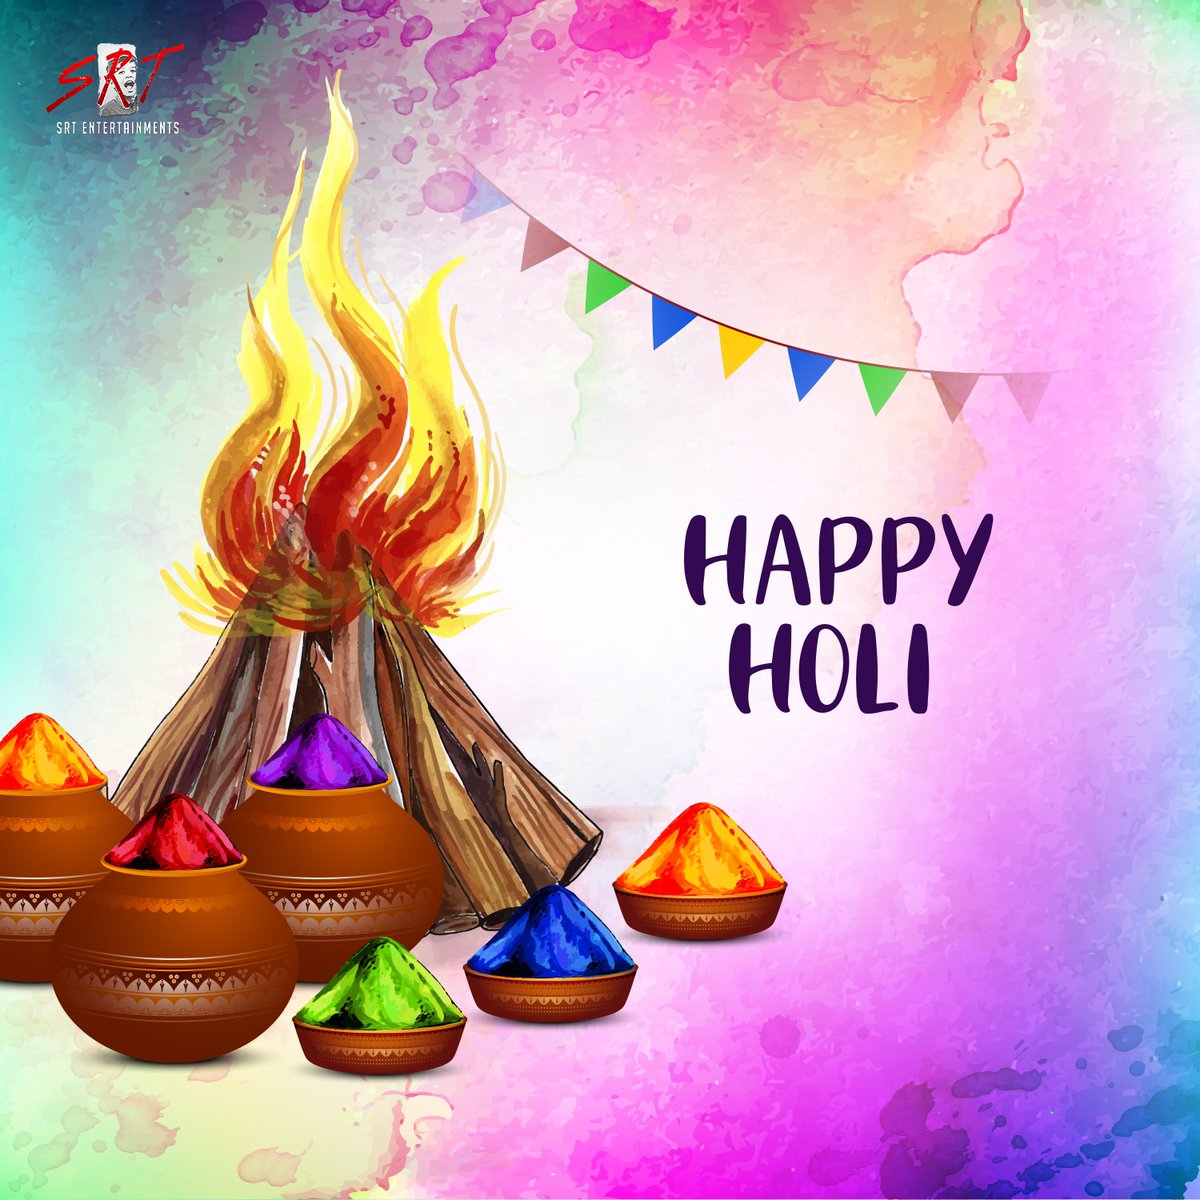 Colour your lives with all shades of happiness! Team SRT entertainments wishes you all a very safe and Happy Holi